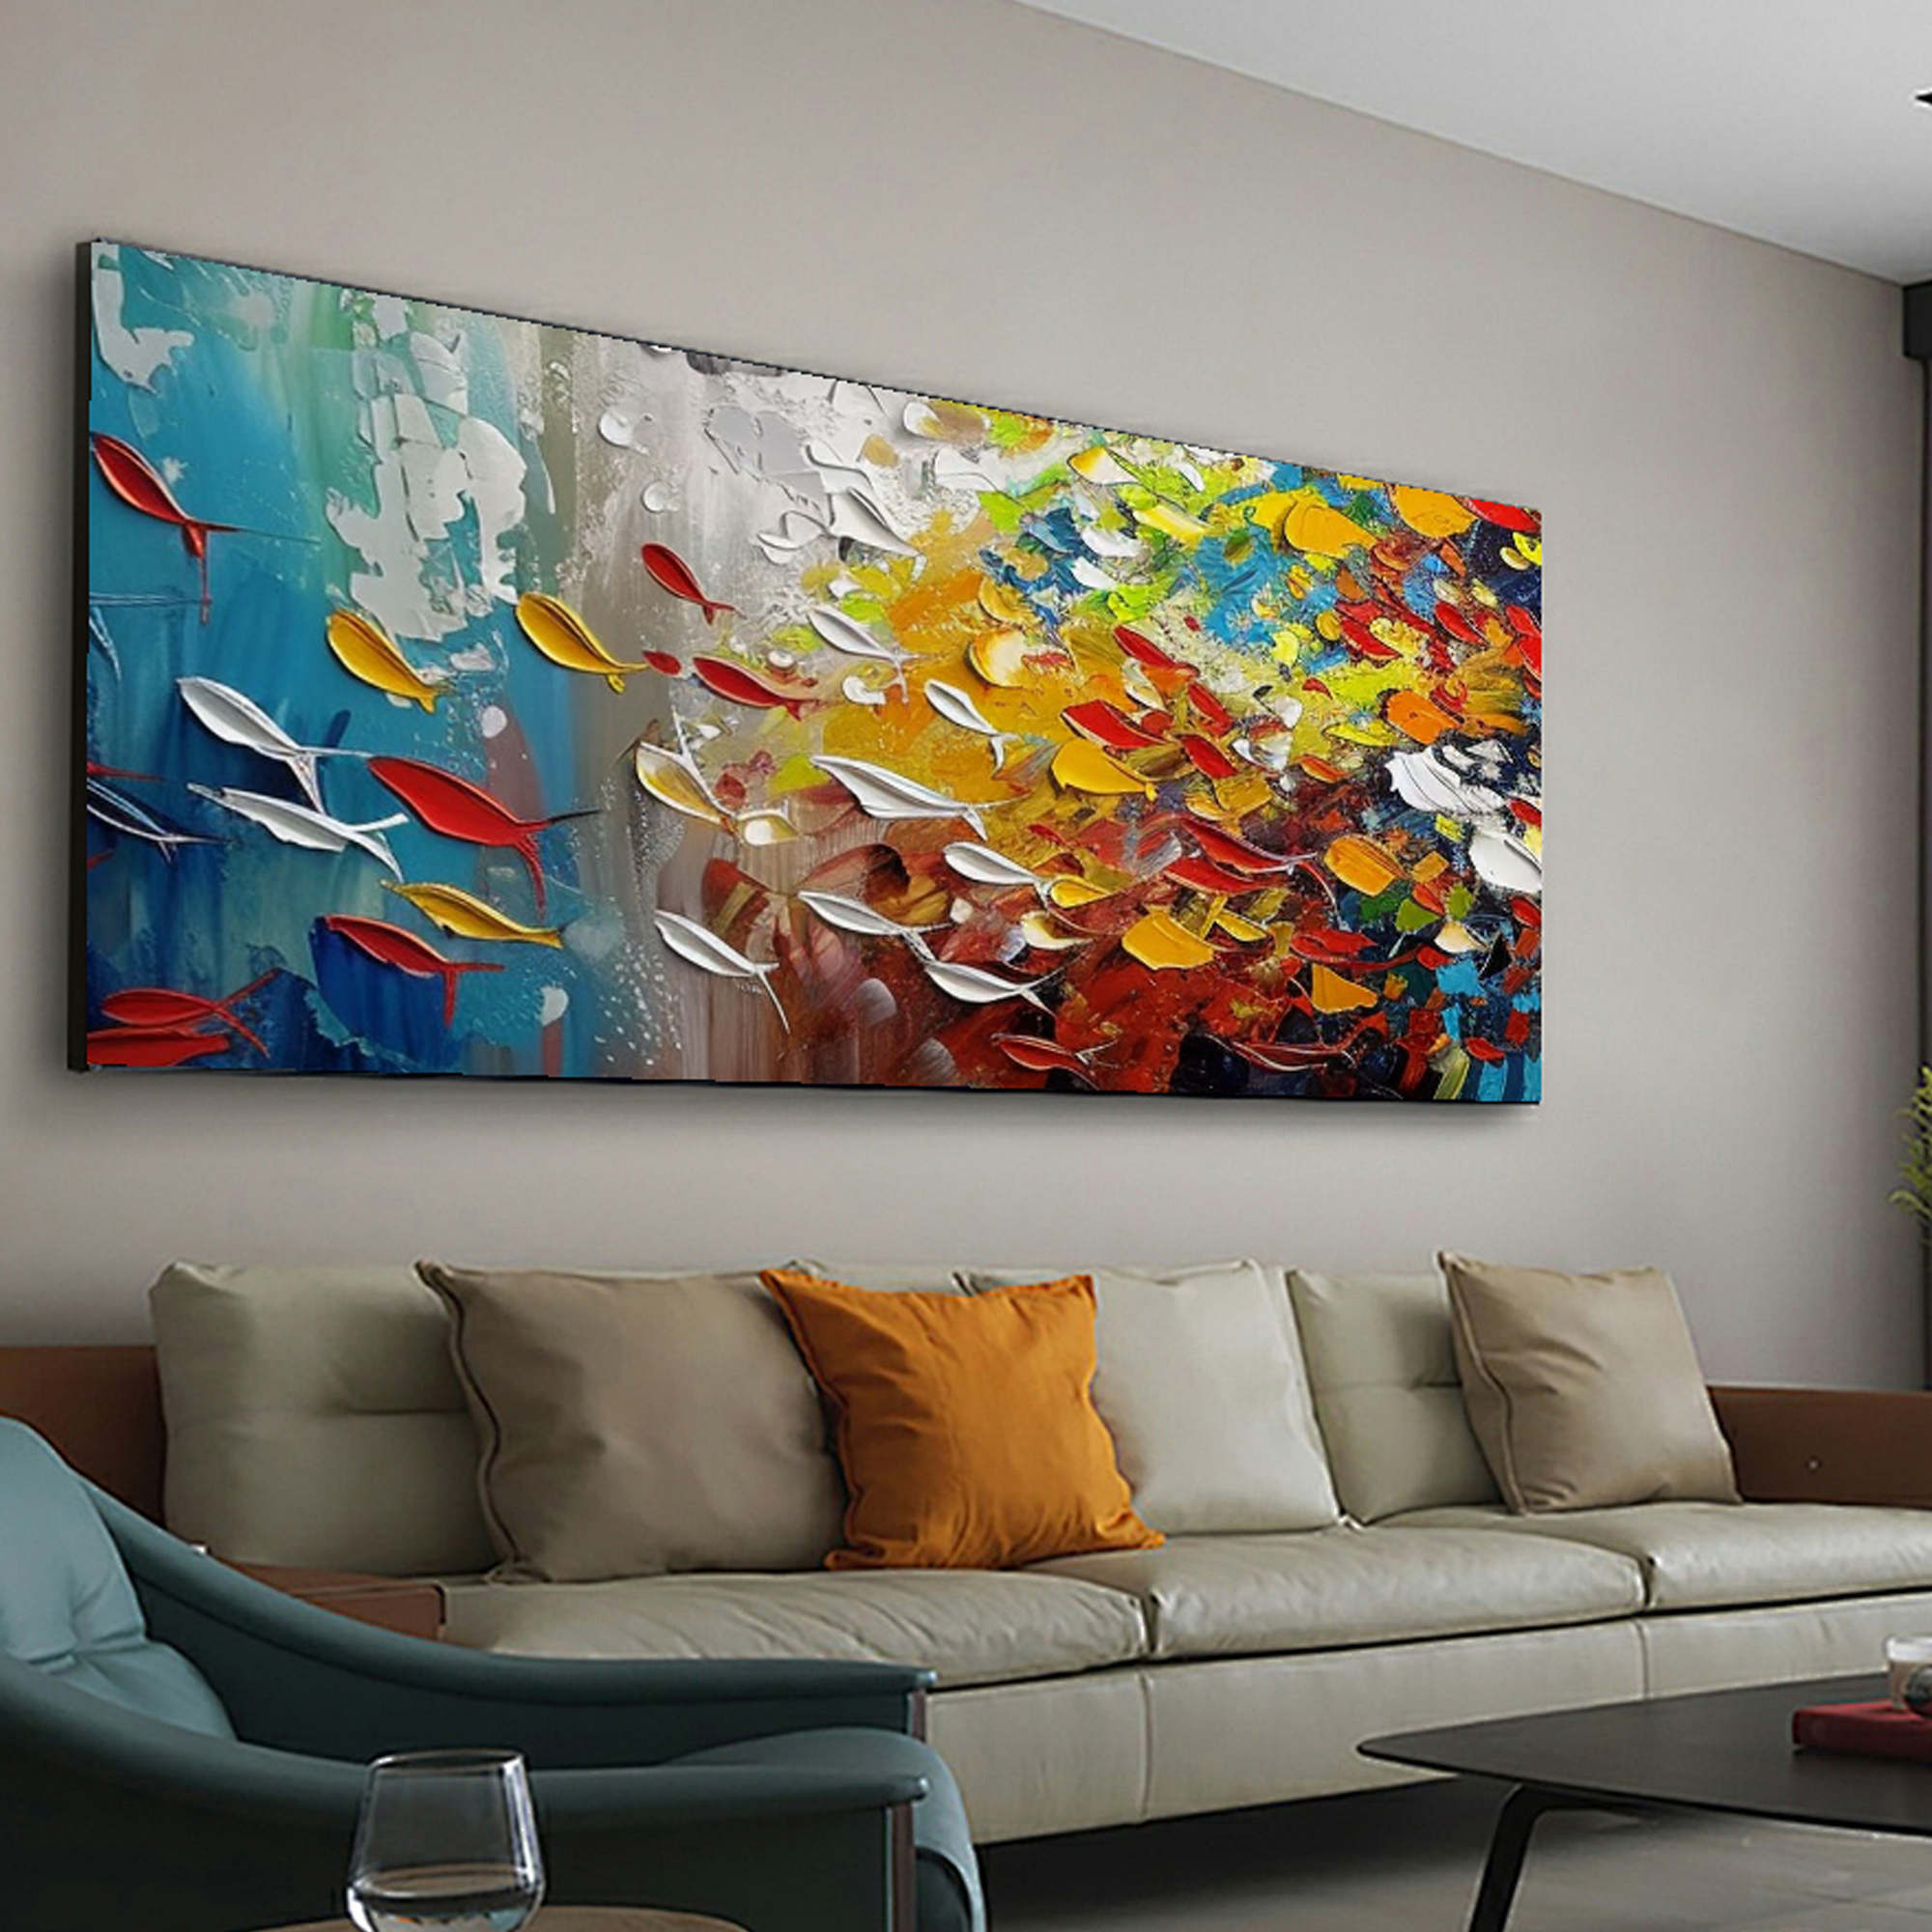 Colorful Painting "Colorful Symphony"